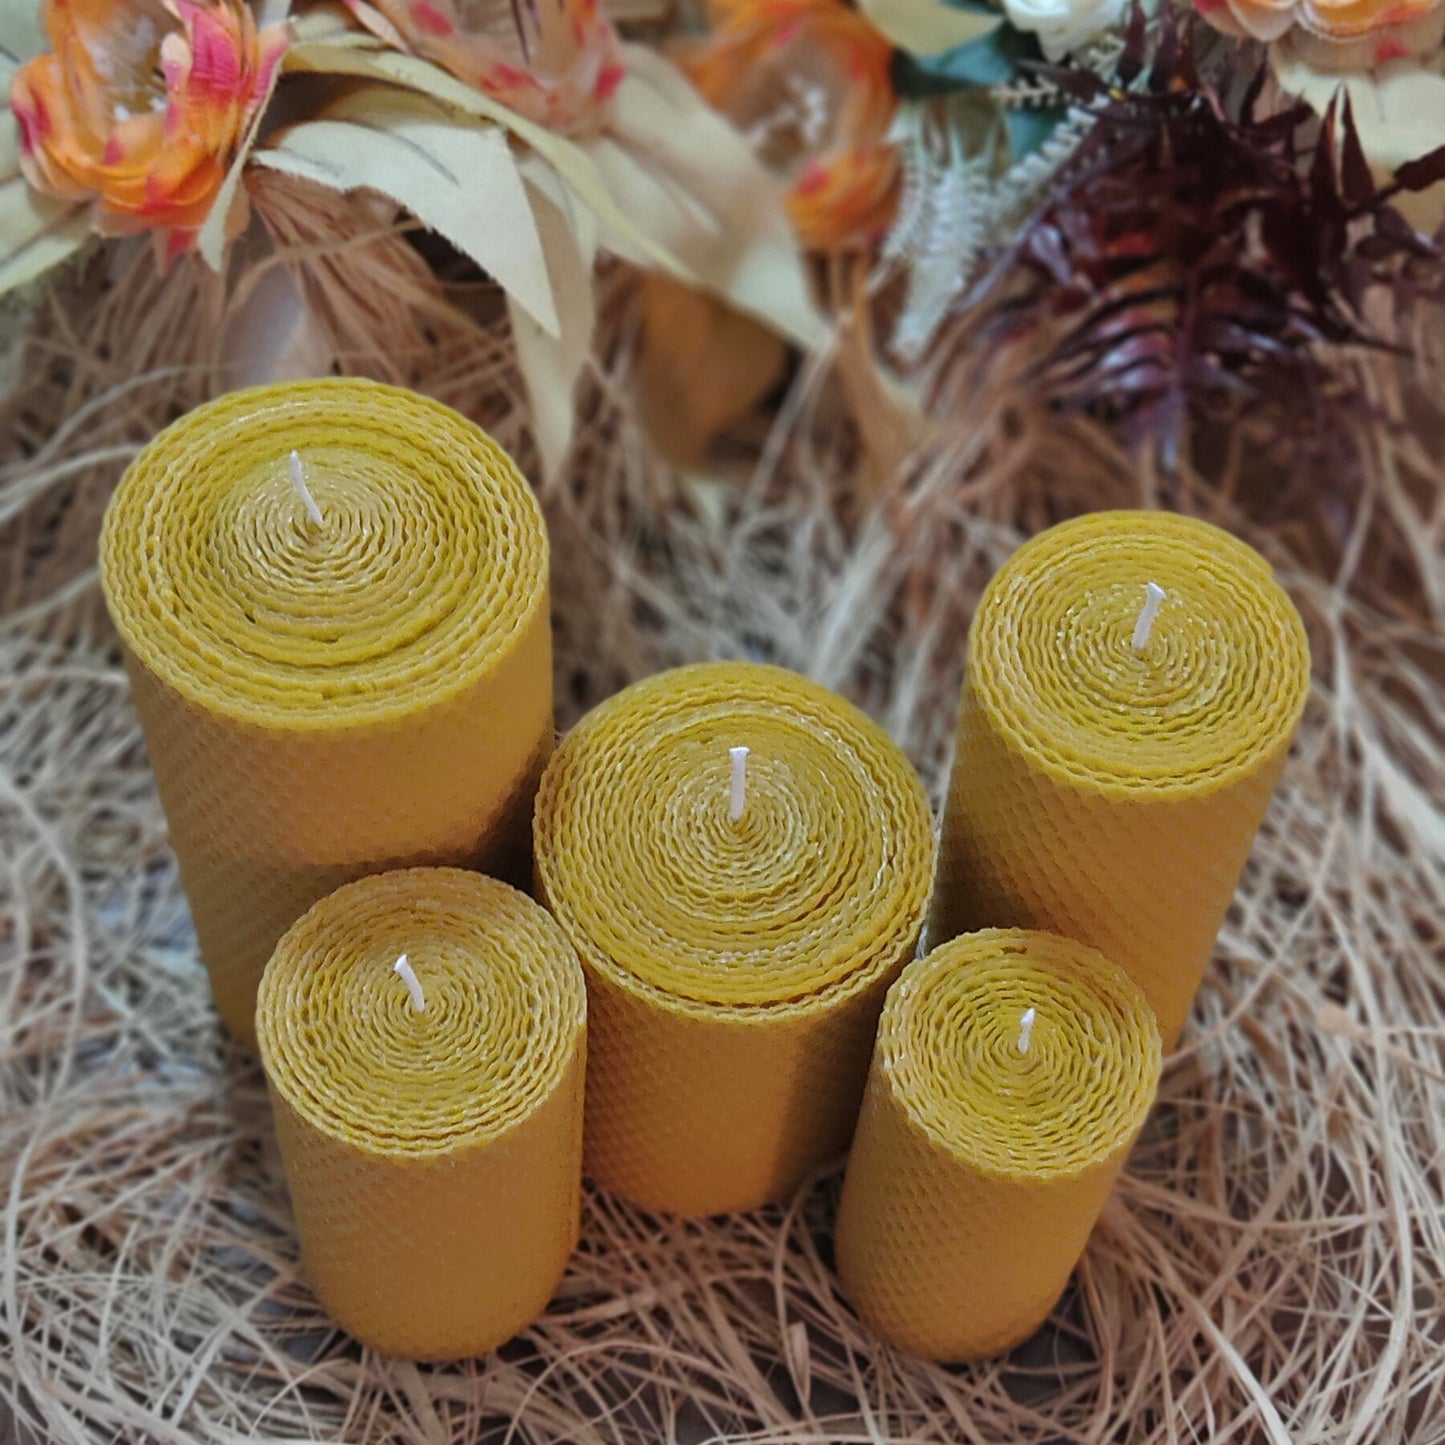 HoneyComb Beeswax Candles Set of 5, %100 pure beeswax candles